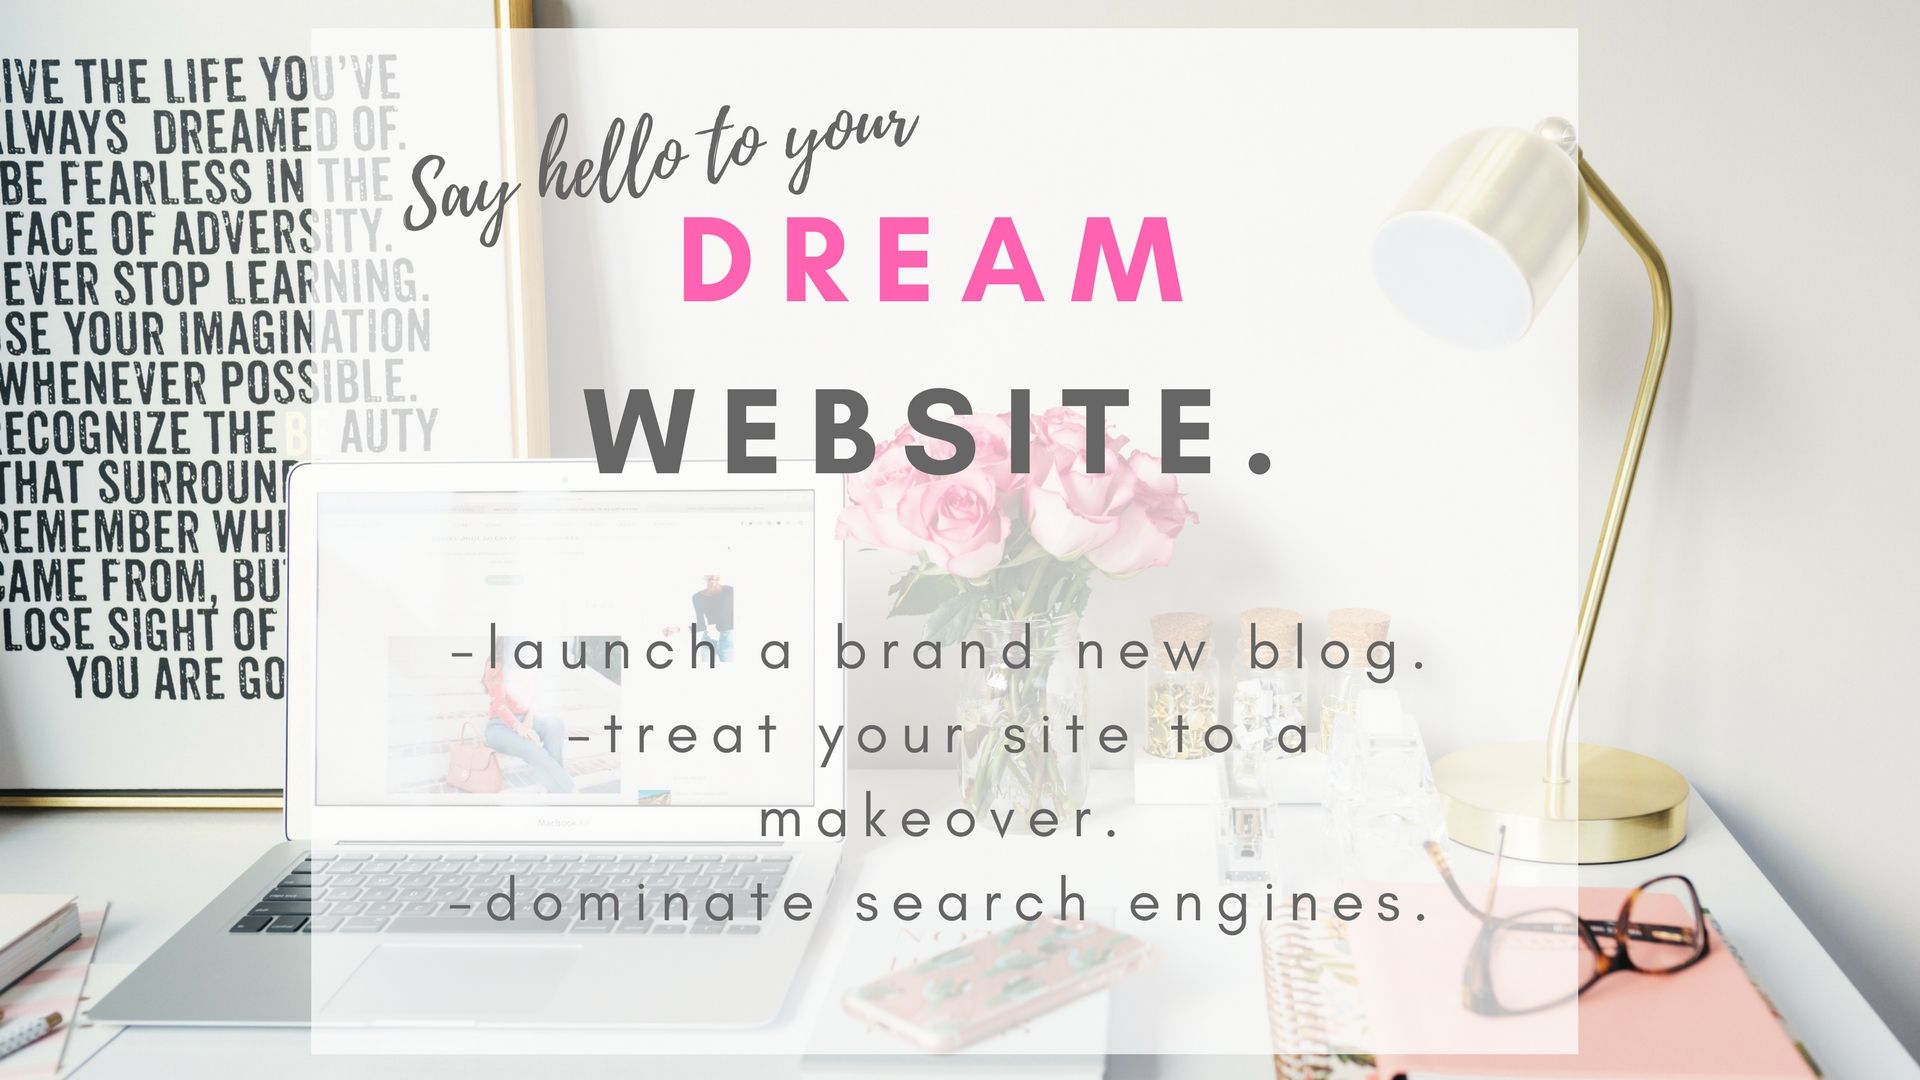 Being clear from the beginning on how to launch a blog will catapult you to unimaginable levels